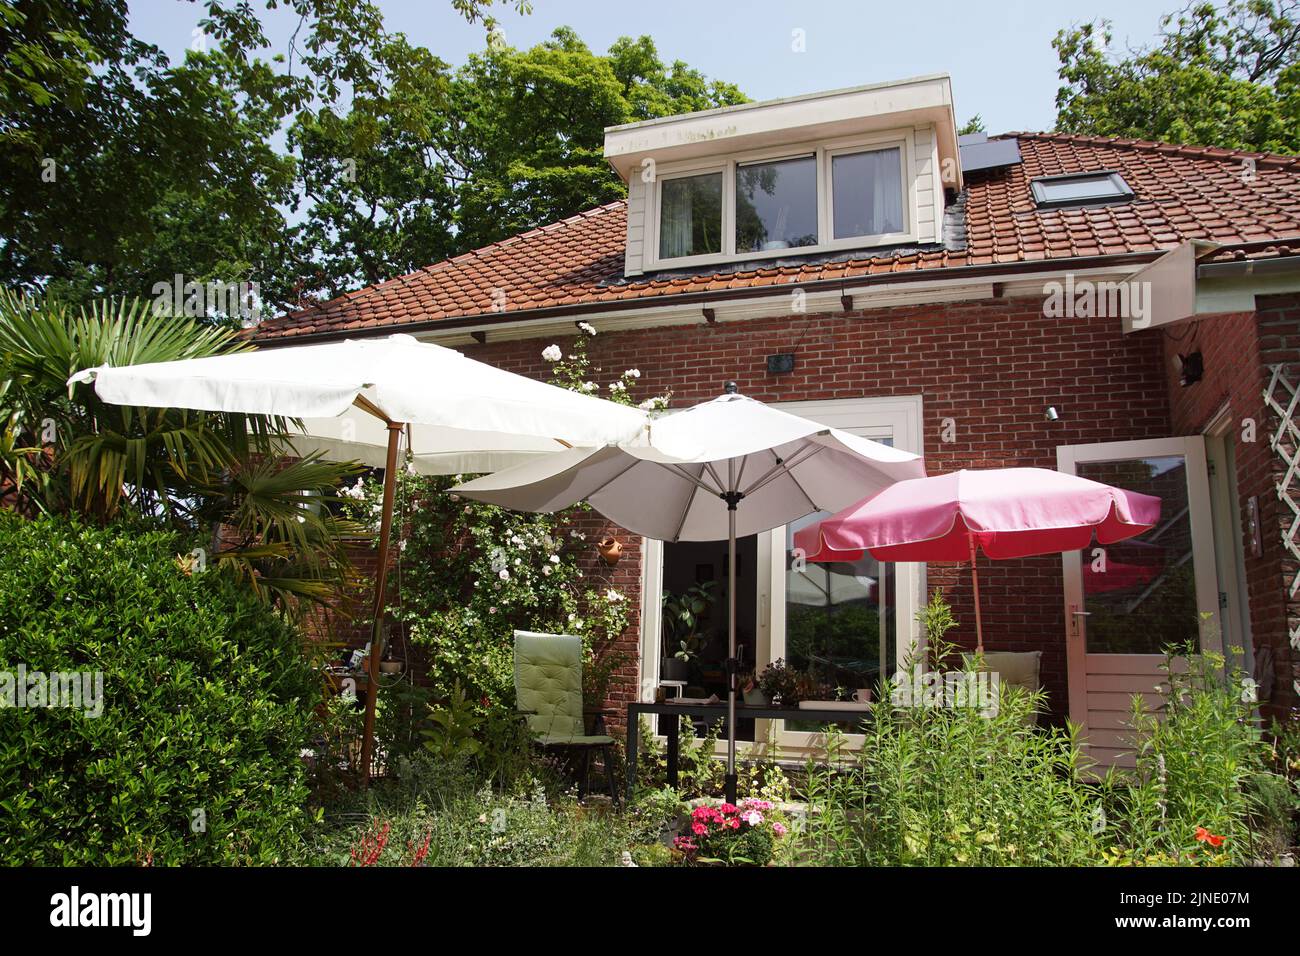 Three different umbrellas in a Dutch backyard on a sunny day. June, Netherlands. Stock Photo